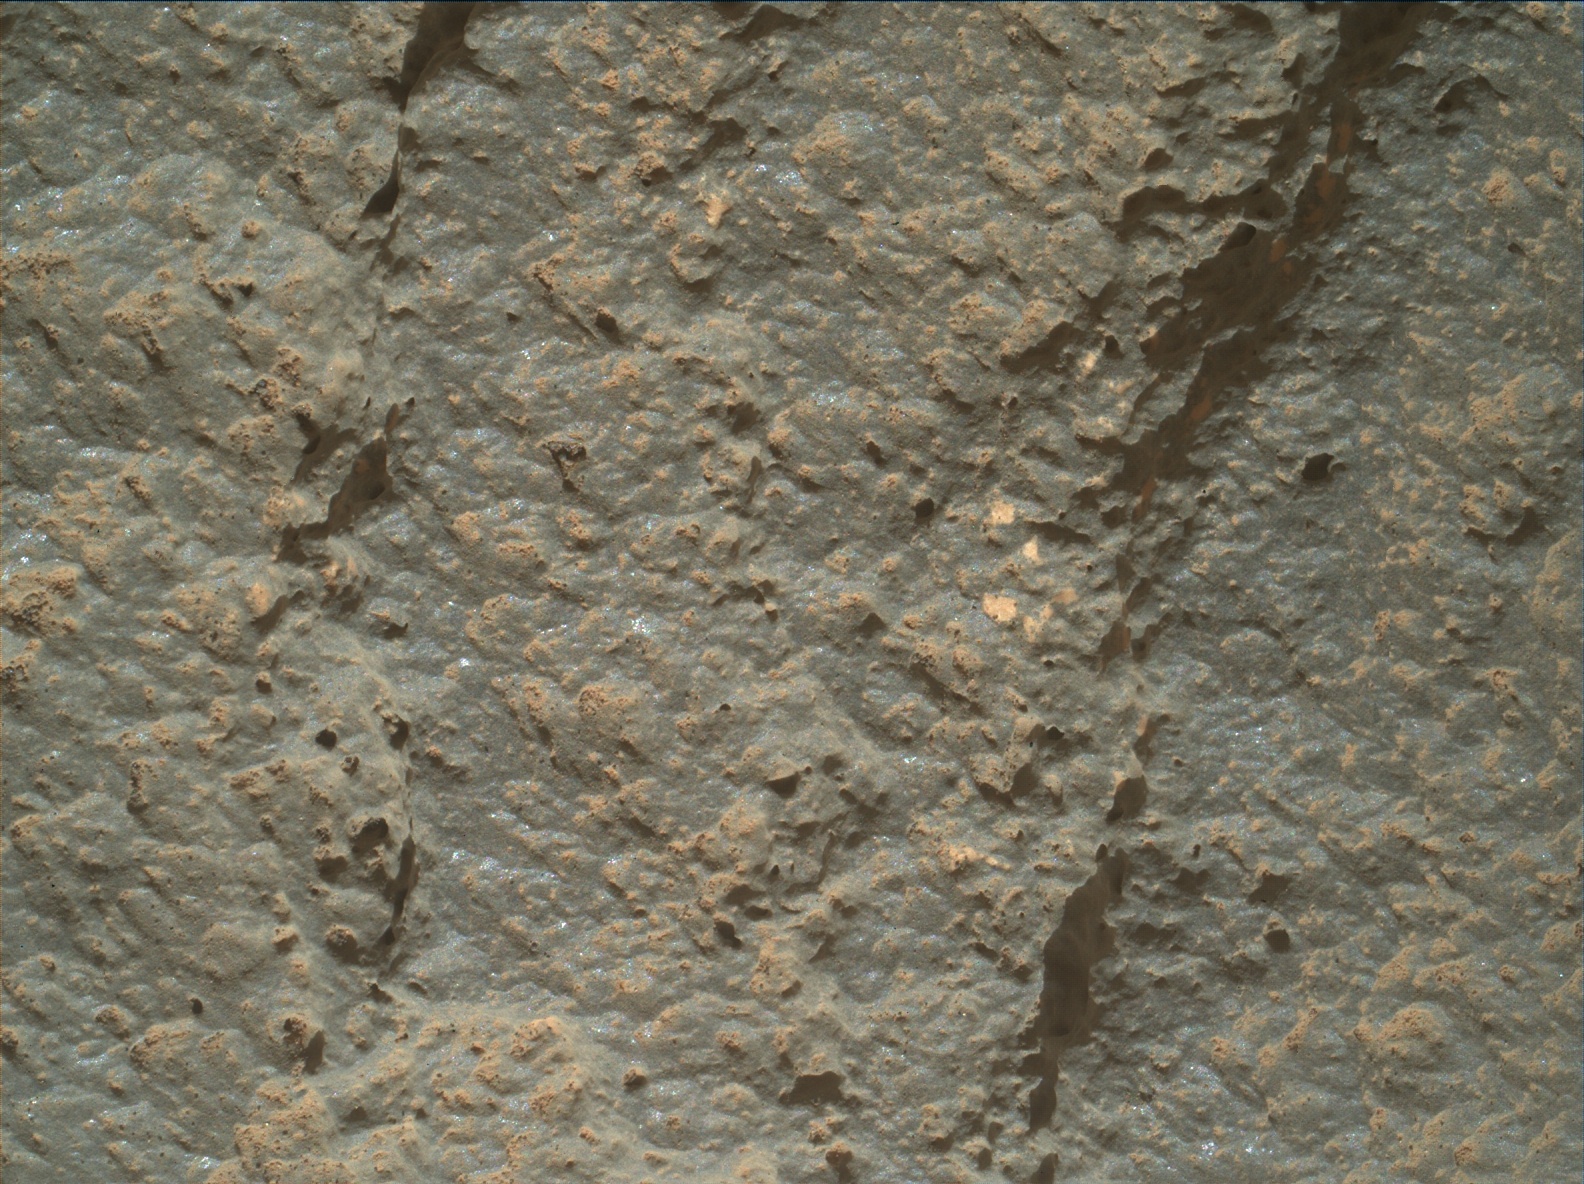 Nasa's Mars rover Curiosity acquired this image using its Mars Hand Lens Imager (MAHLI) on Sol 2633